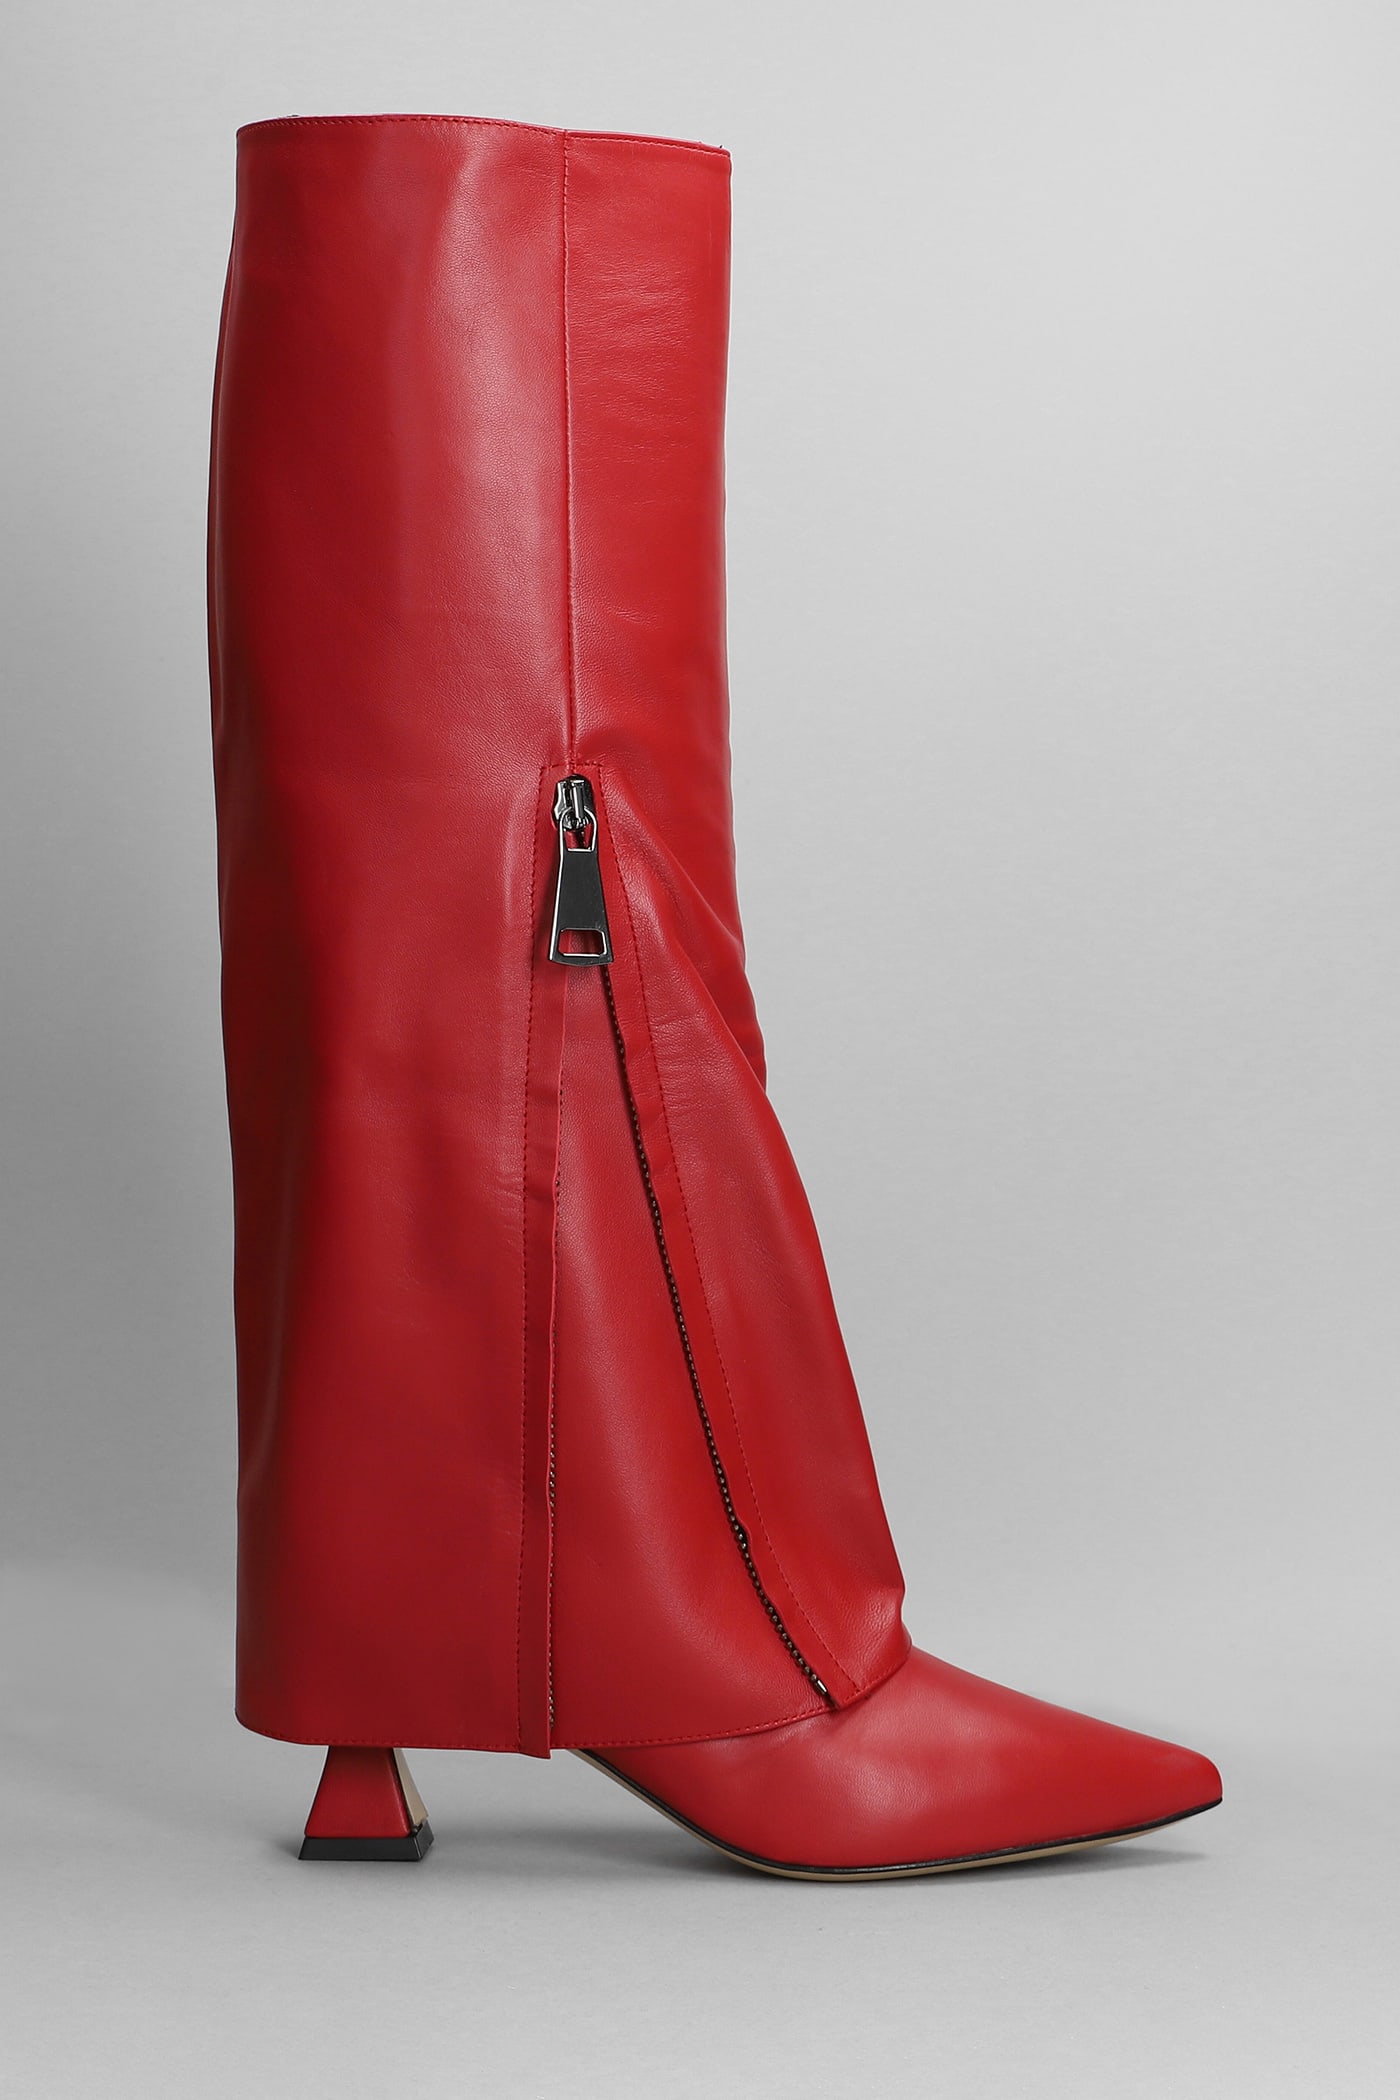 Alchimia High Heels Boots In Red Leather